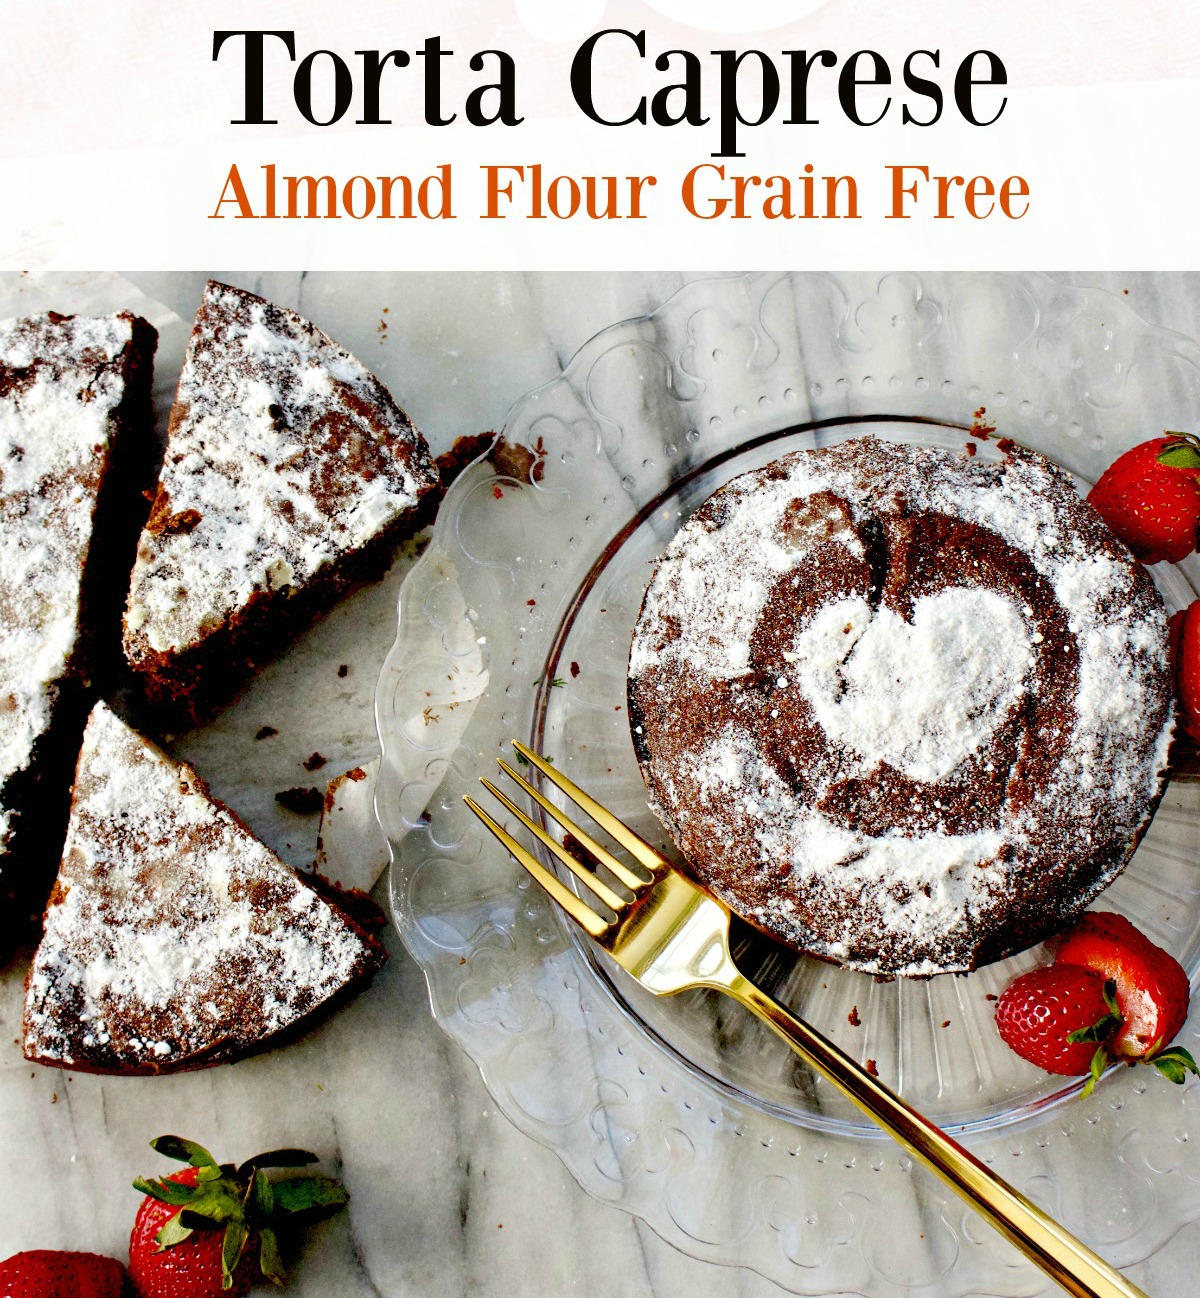 How to Make Torta Caprese, Chocolate Almond Flour Cake, Gluten Free from Spinach Tiger